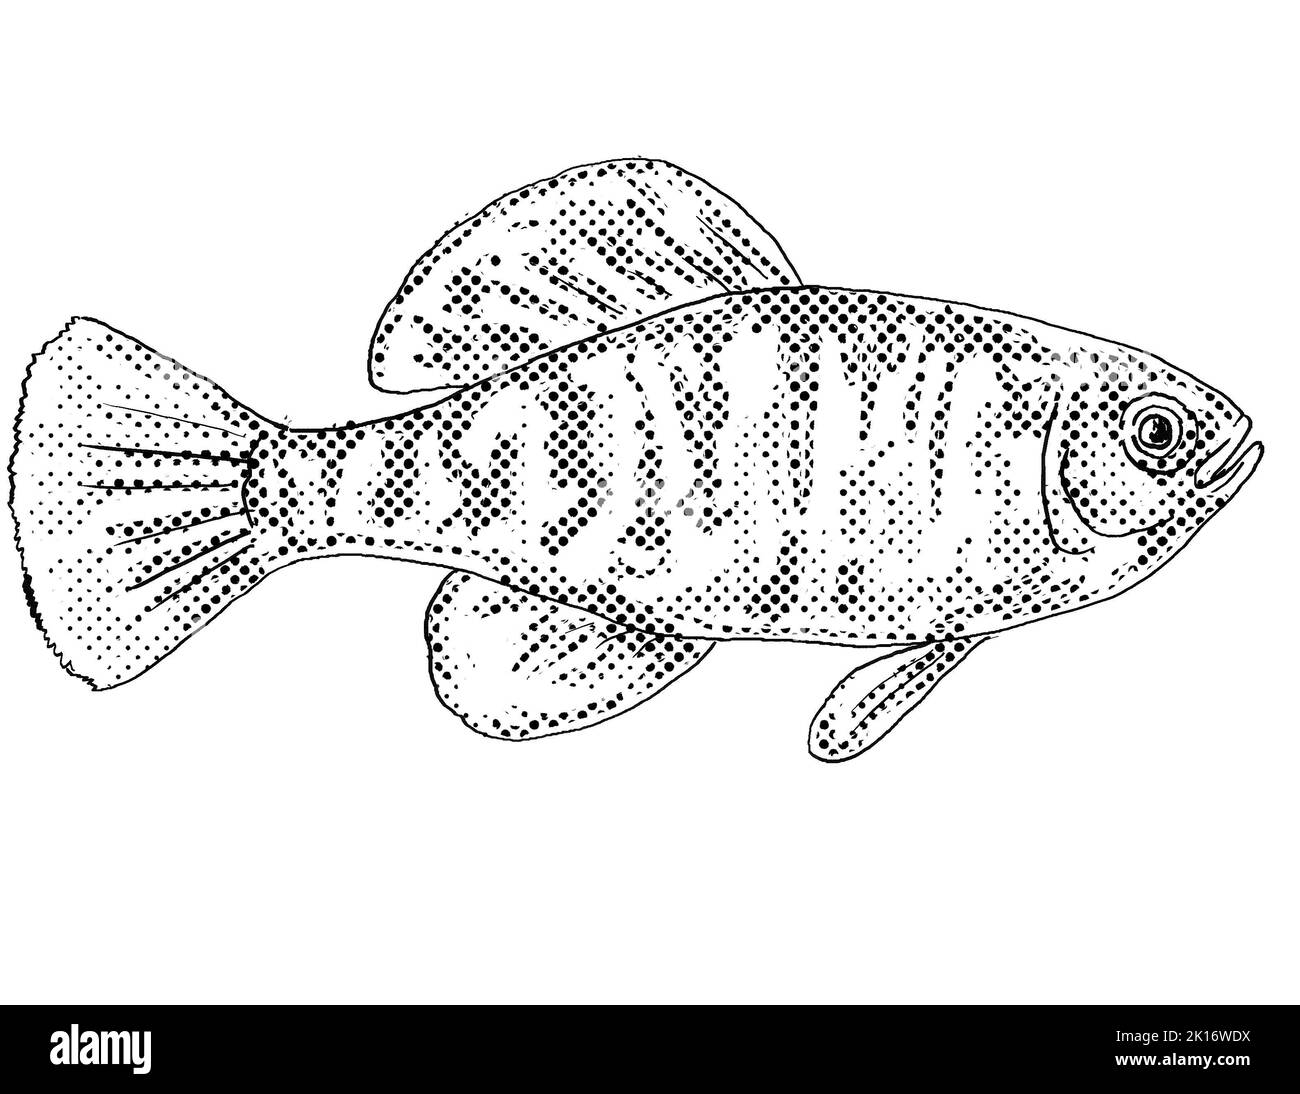 Cartoon style line drawing of a Gulf Coast pygmy sunfish or Elassoma gilberti, a freshwater fish endemic to North America with halftone dots shading o Stock Photo